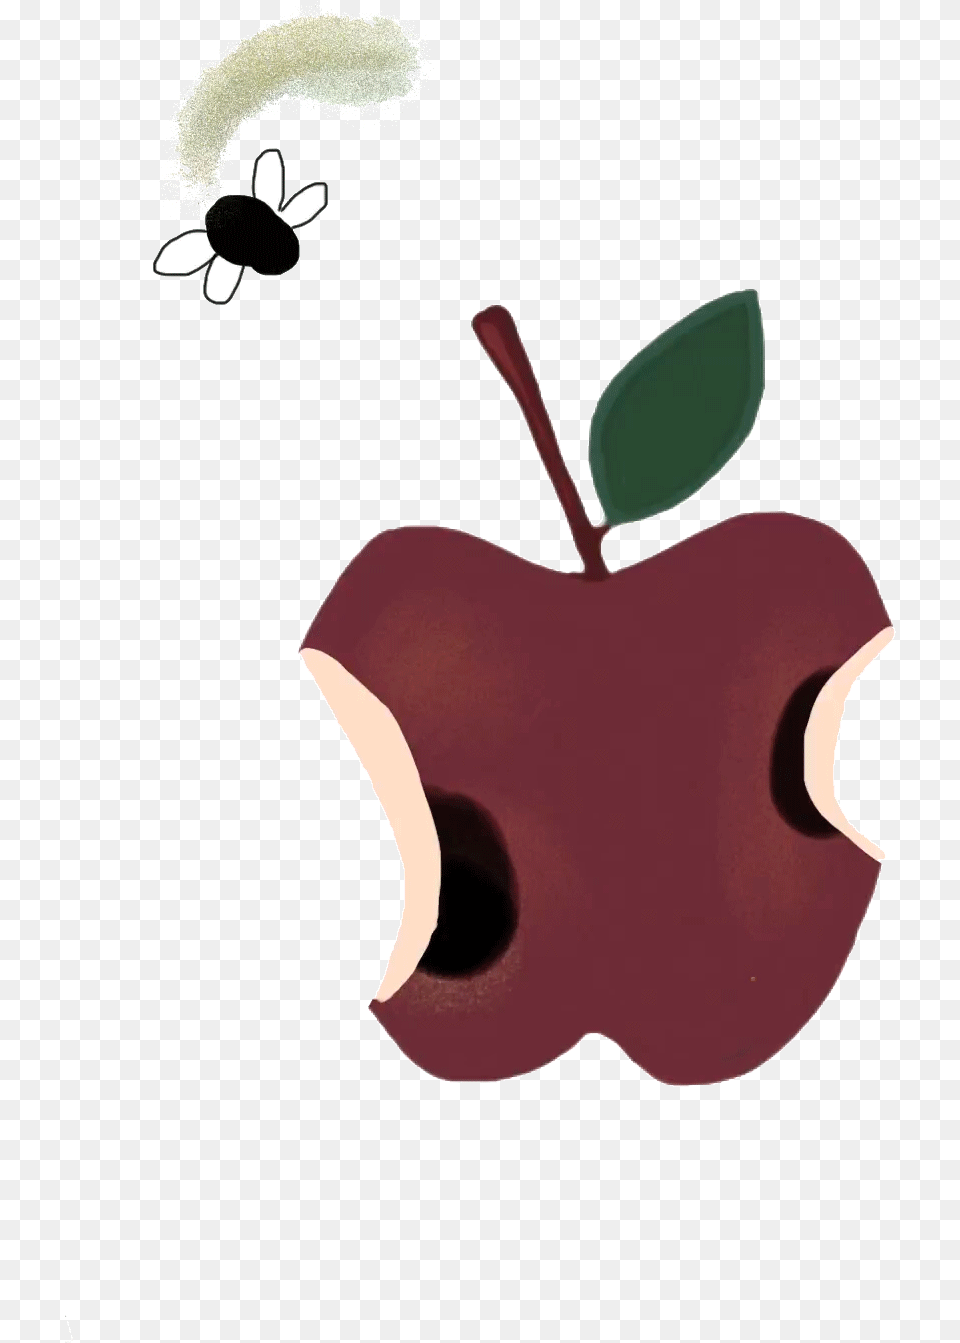 Library Of Apple Freeuse Gif Files Animated Apple Tree Gif Cartoon Food, Fruit, Plant, Produce Free Transparent Png